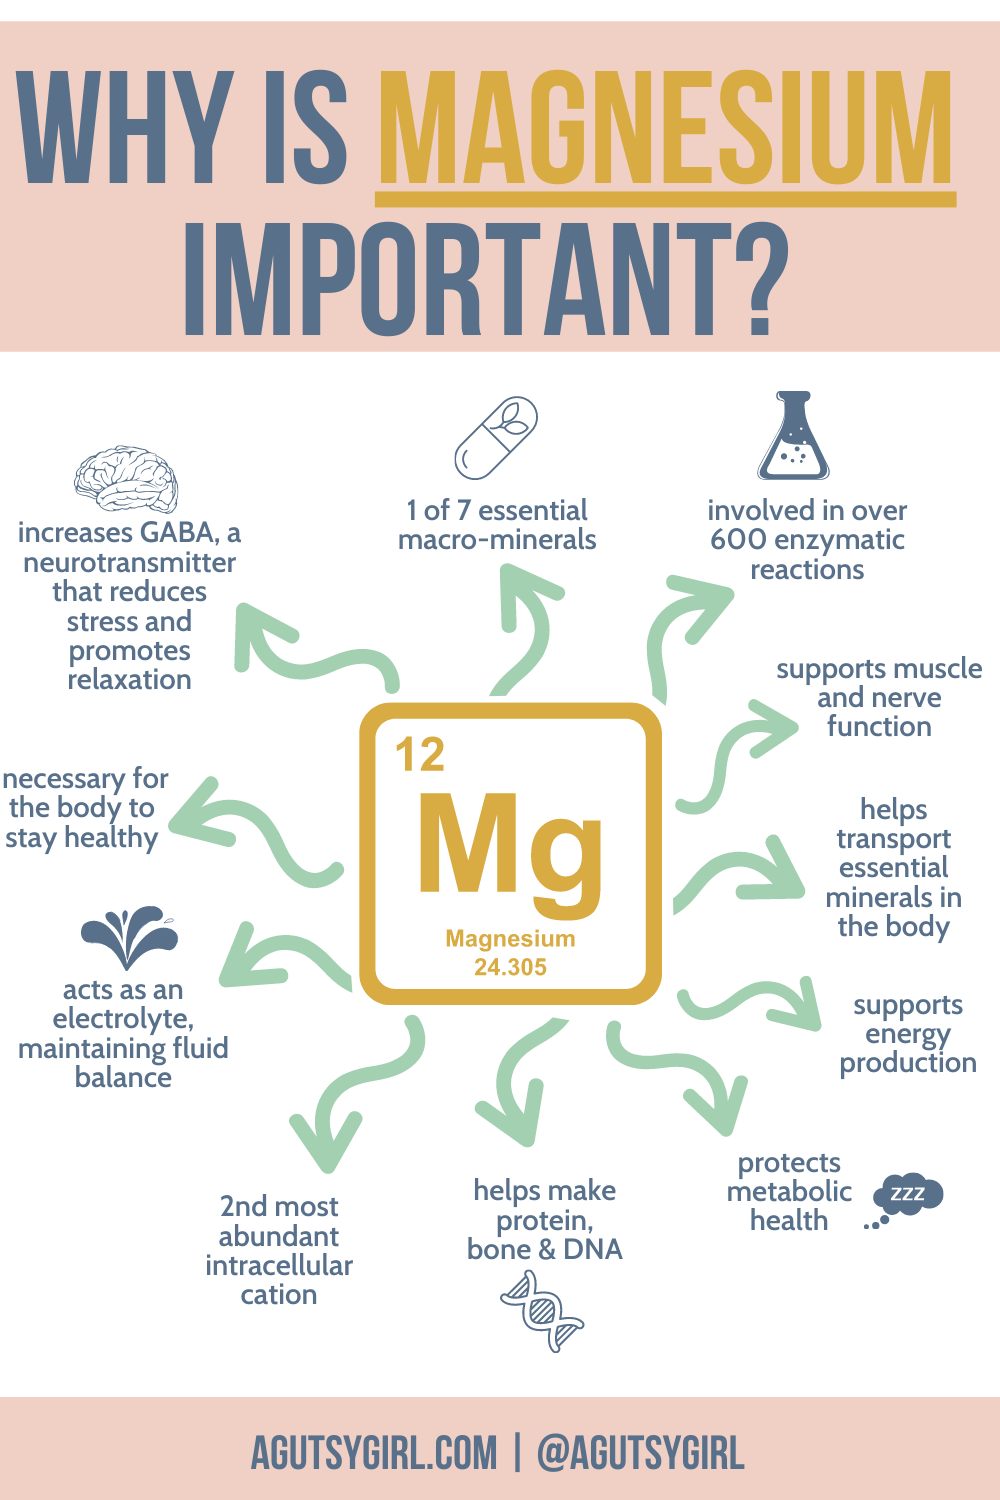 Why is magnesium important